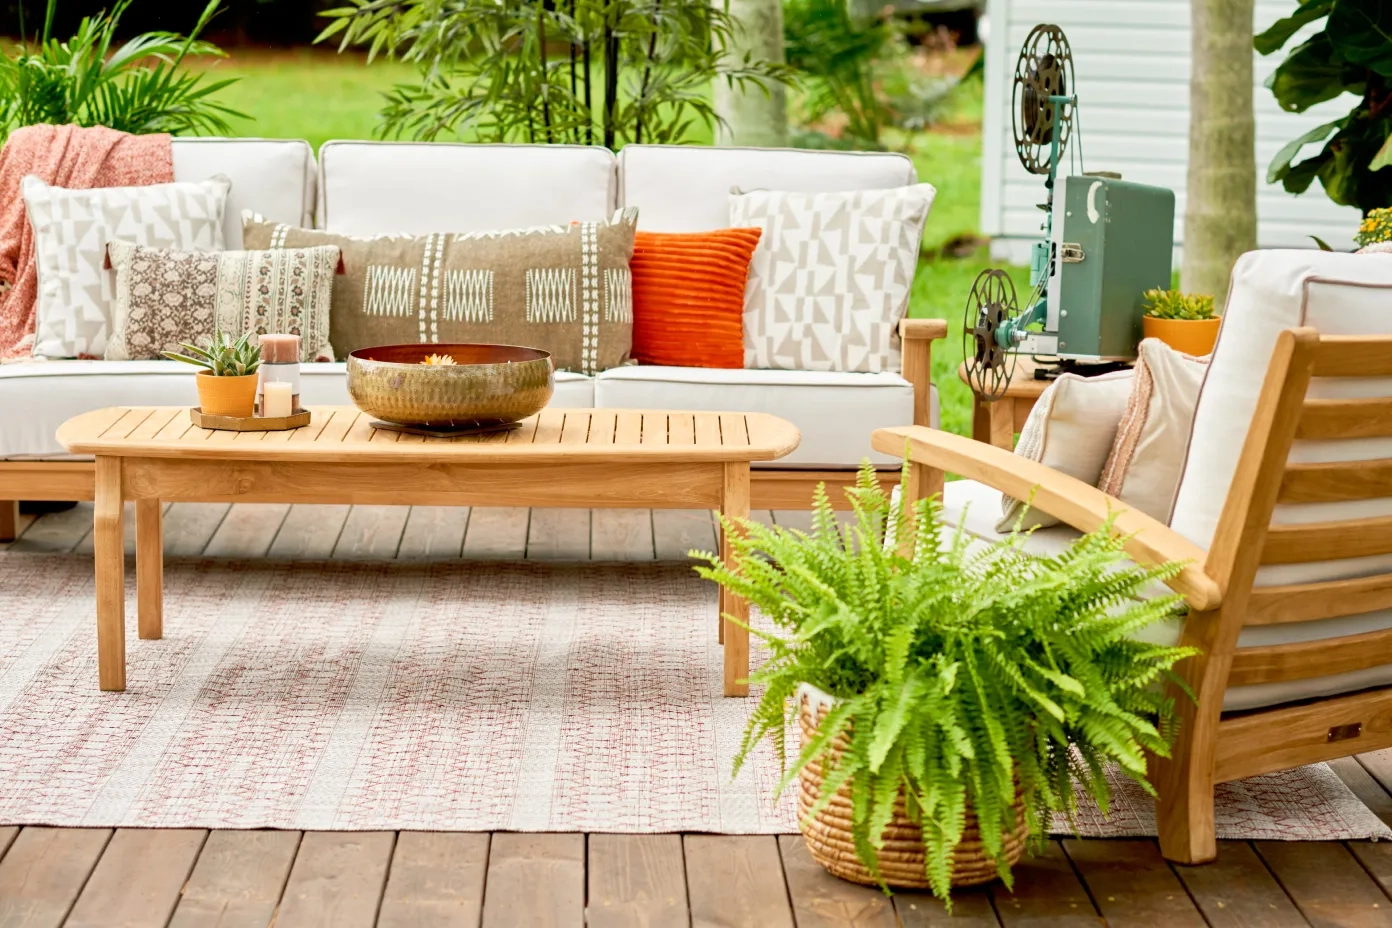 pink and white rug under a wood patio set that is pink and white themed